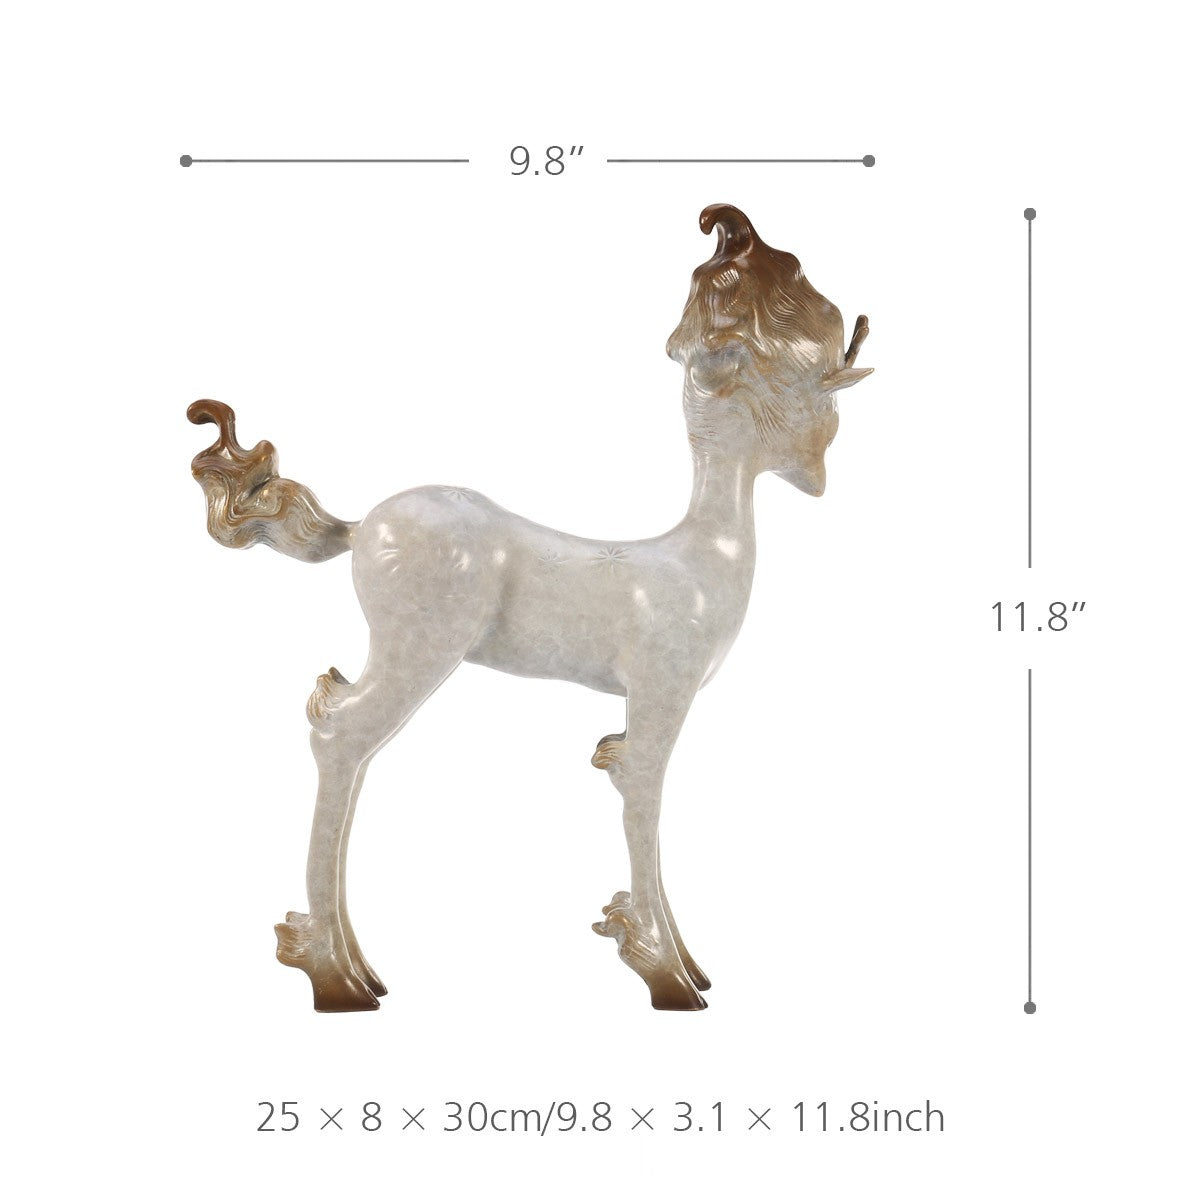 White Deer Decor and Christmas Deer Statues for Christmas Decorations